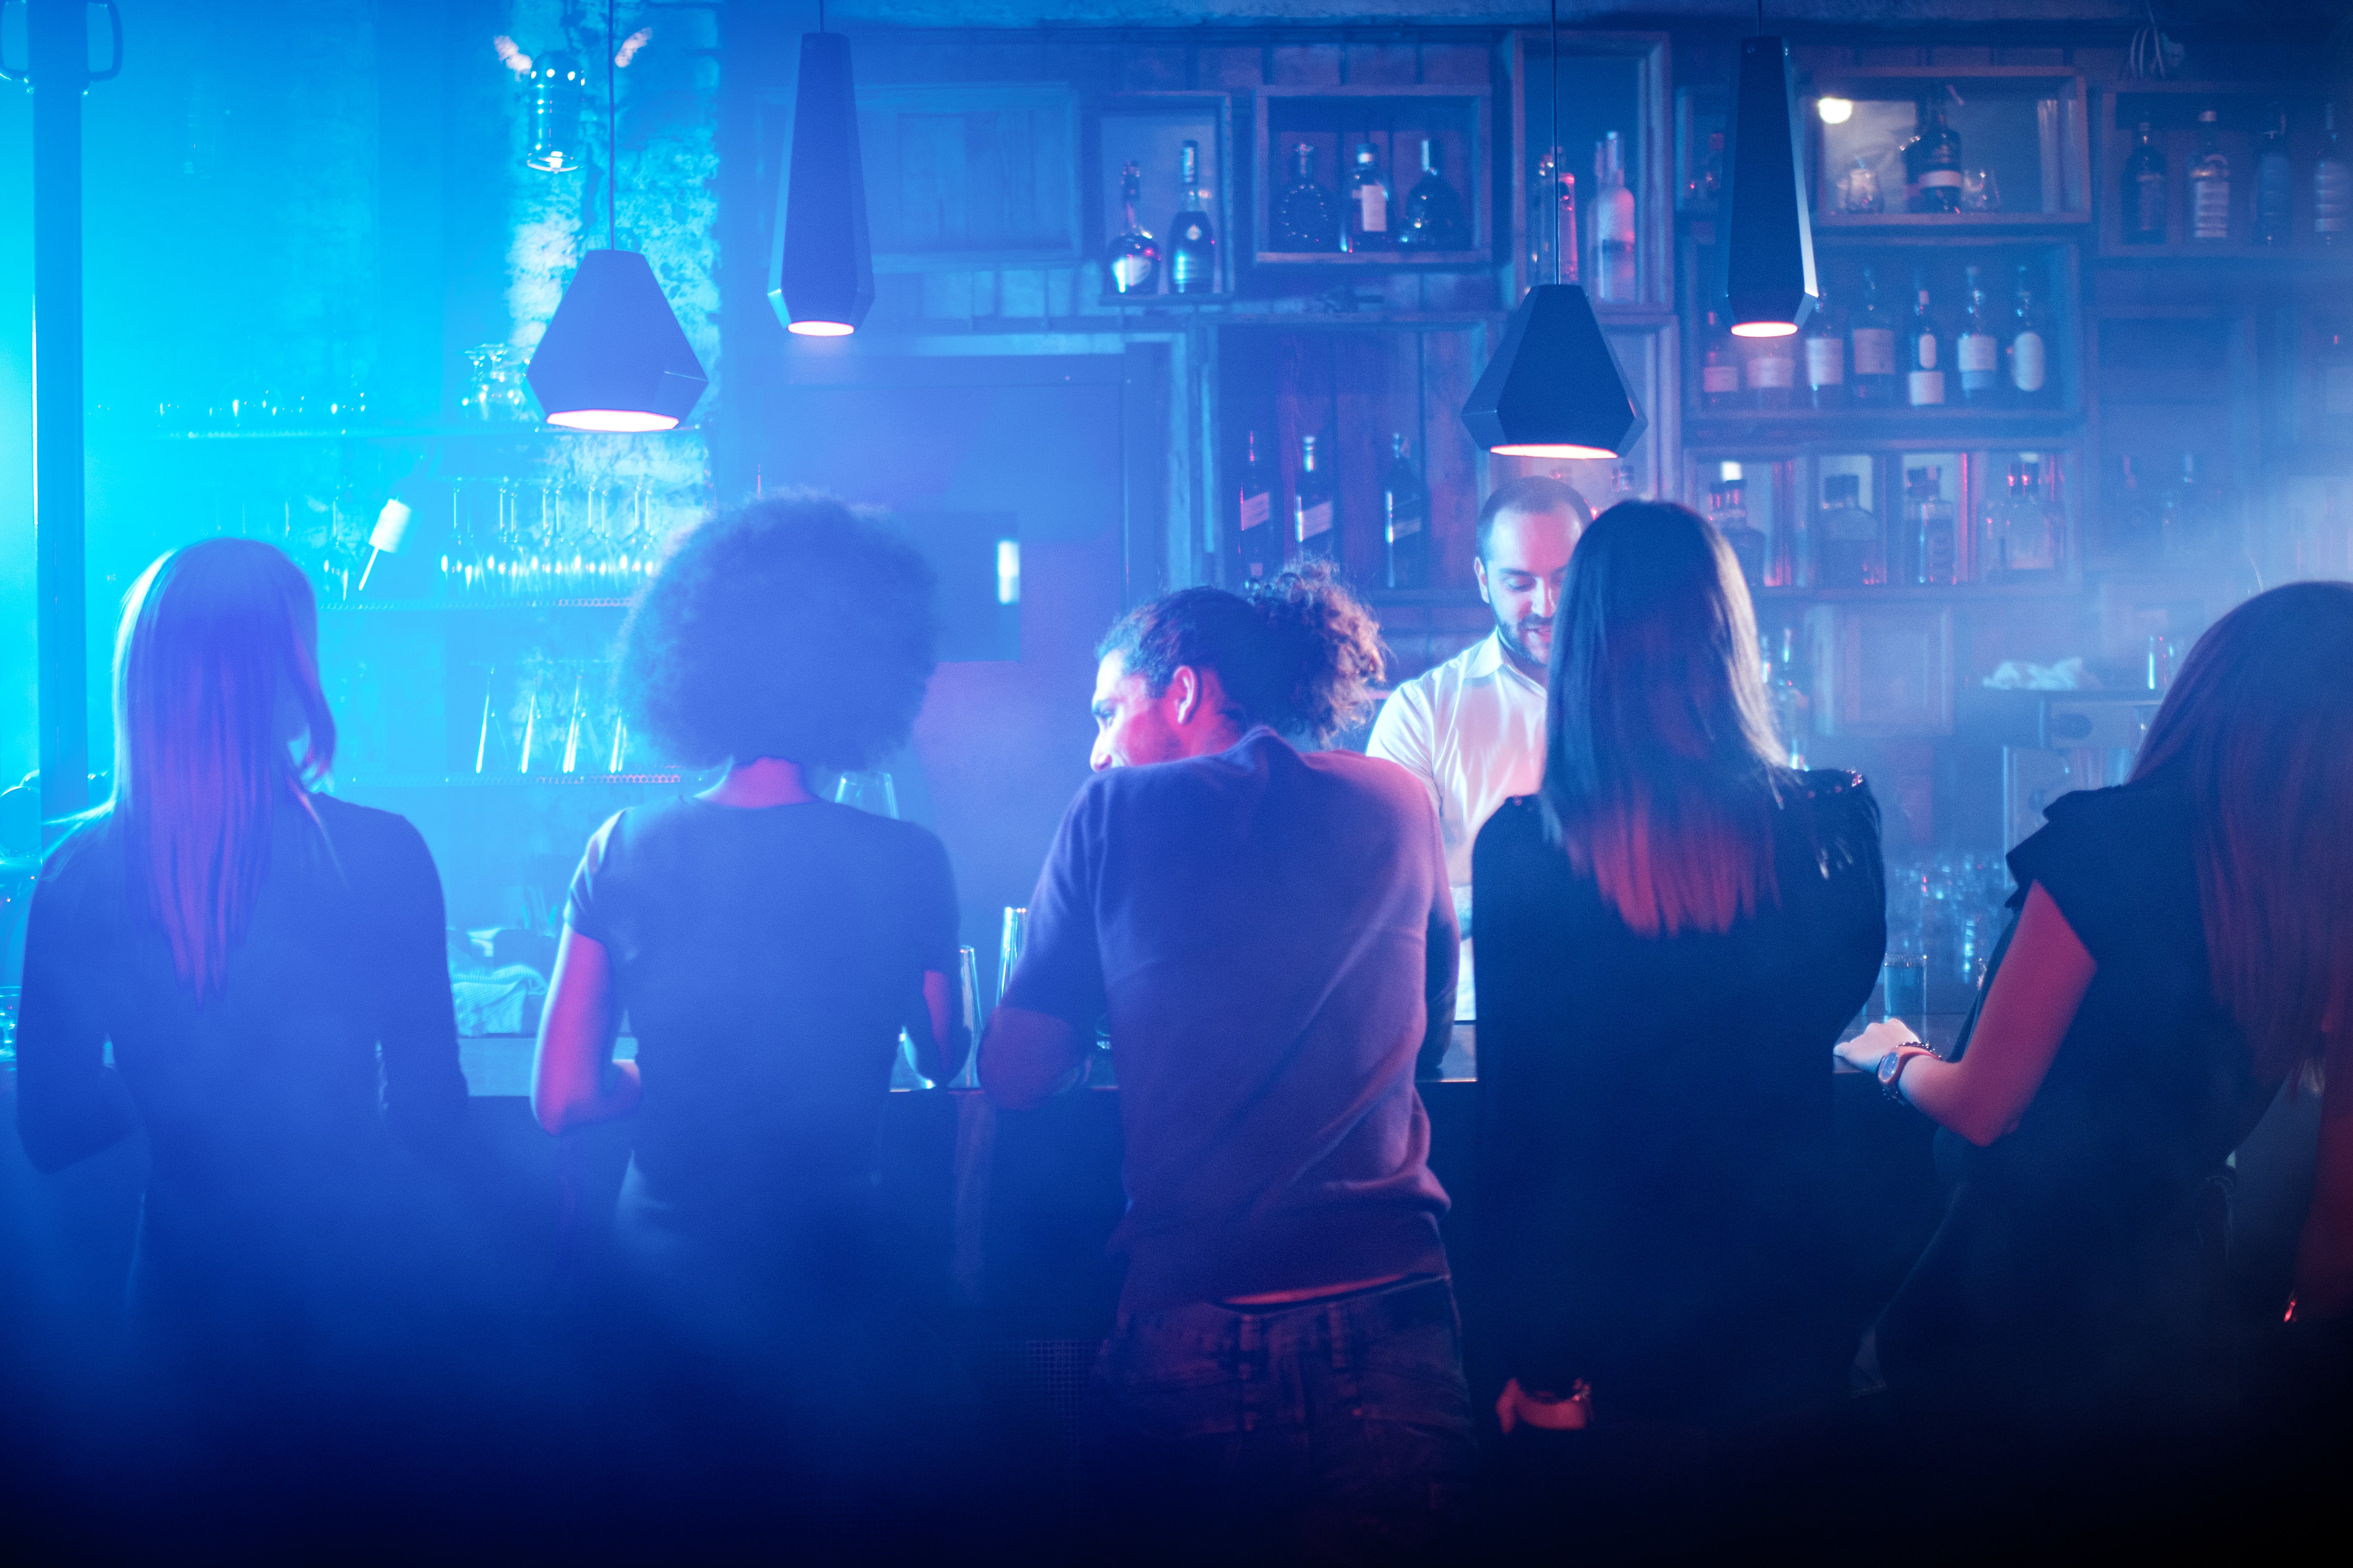 Girls Night In campaign to boycott nightclubs over spikings branded  'backwards